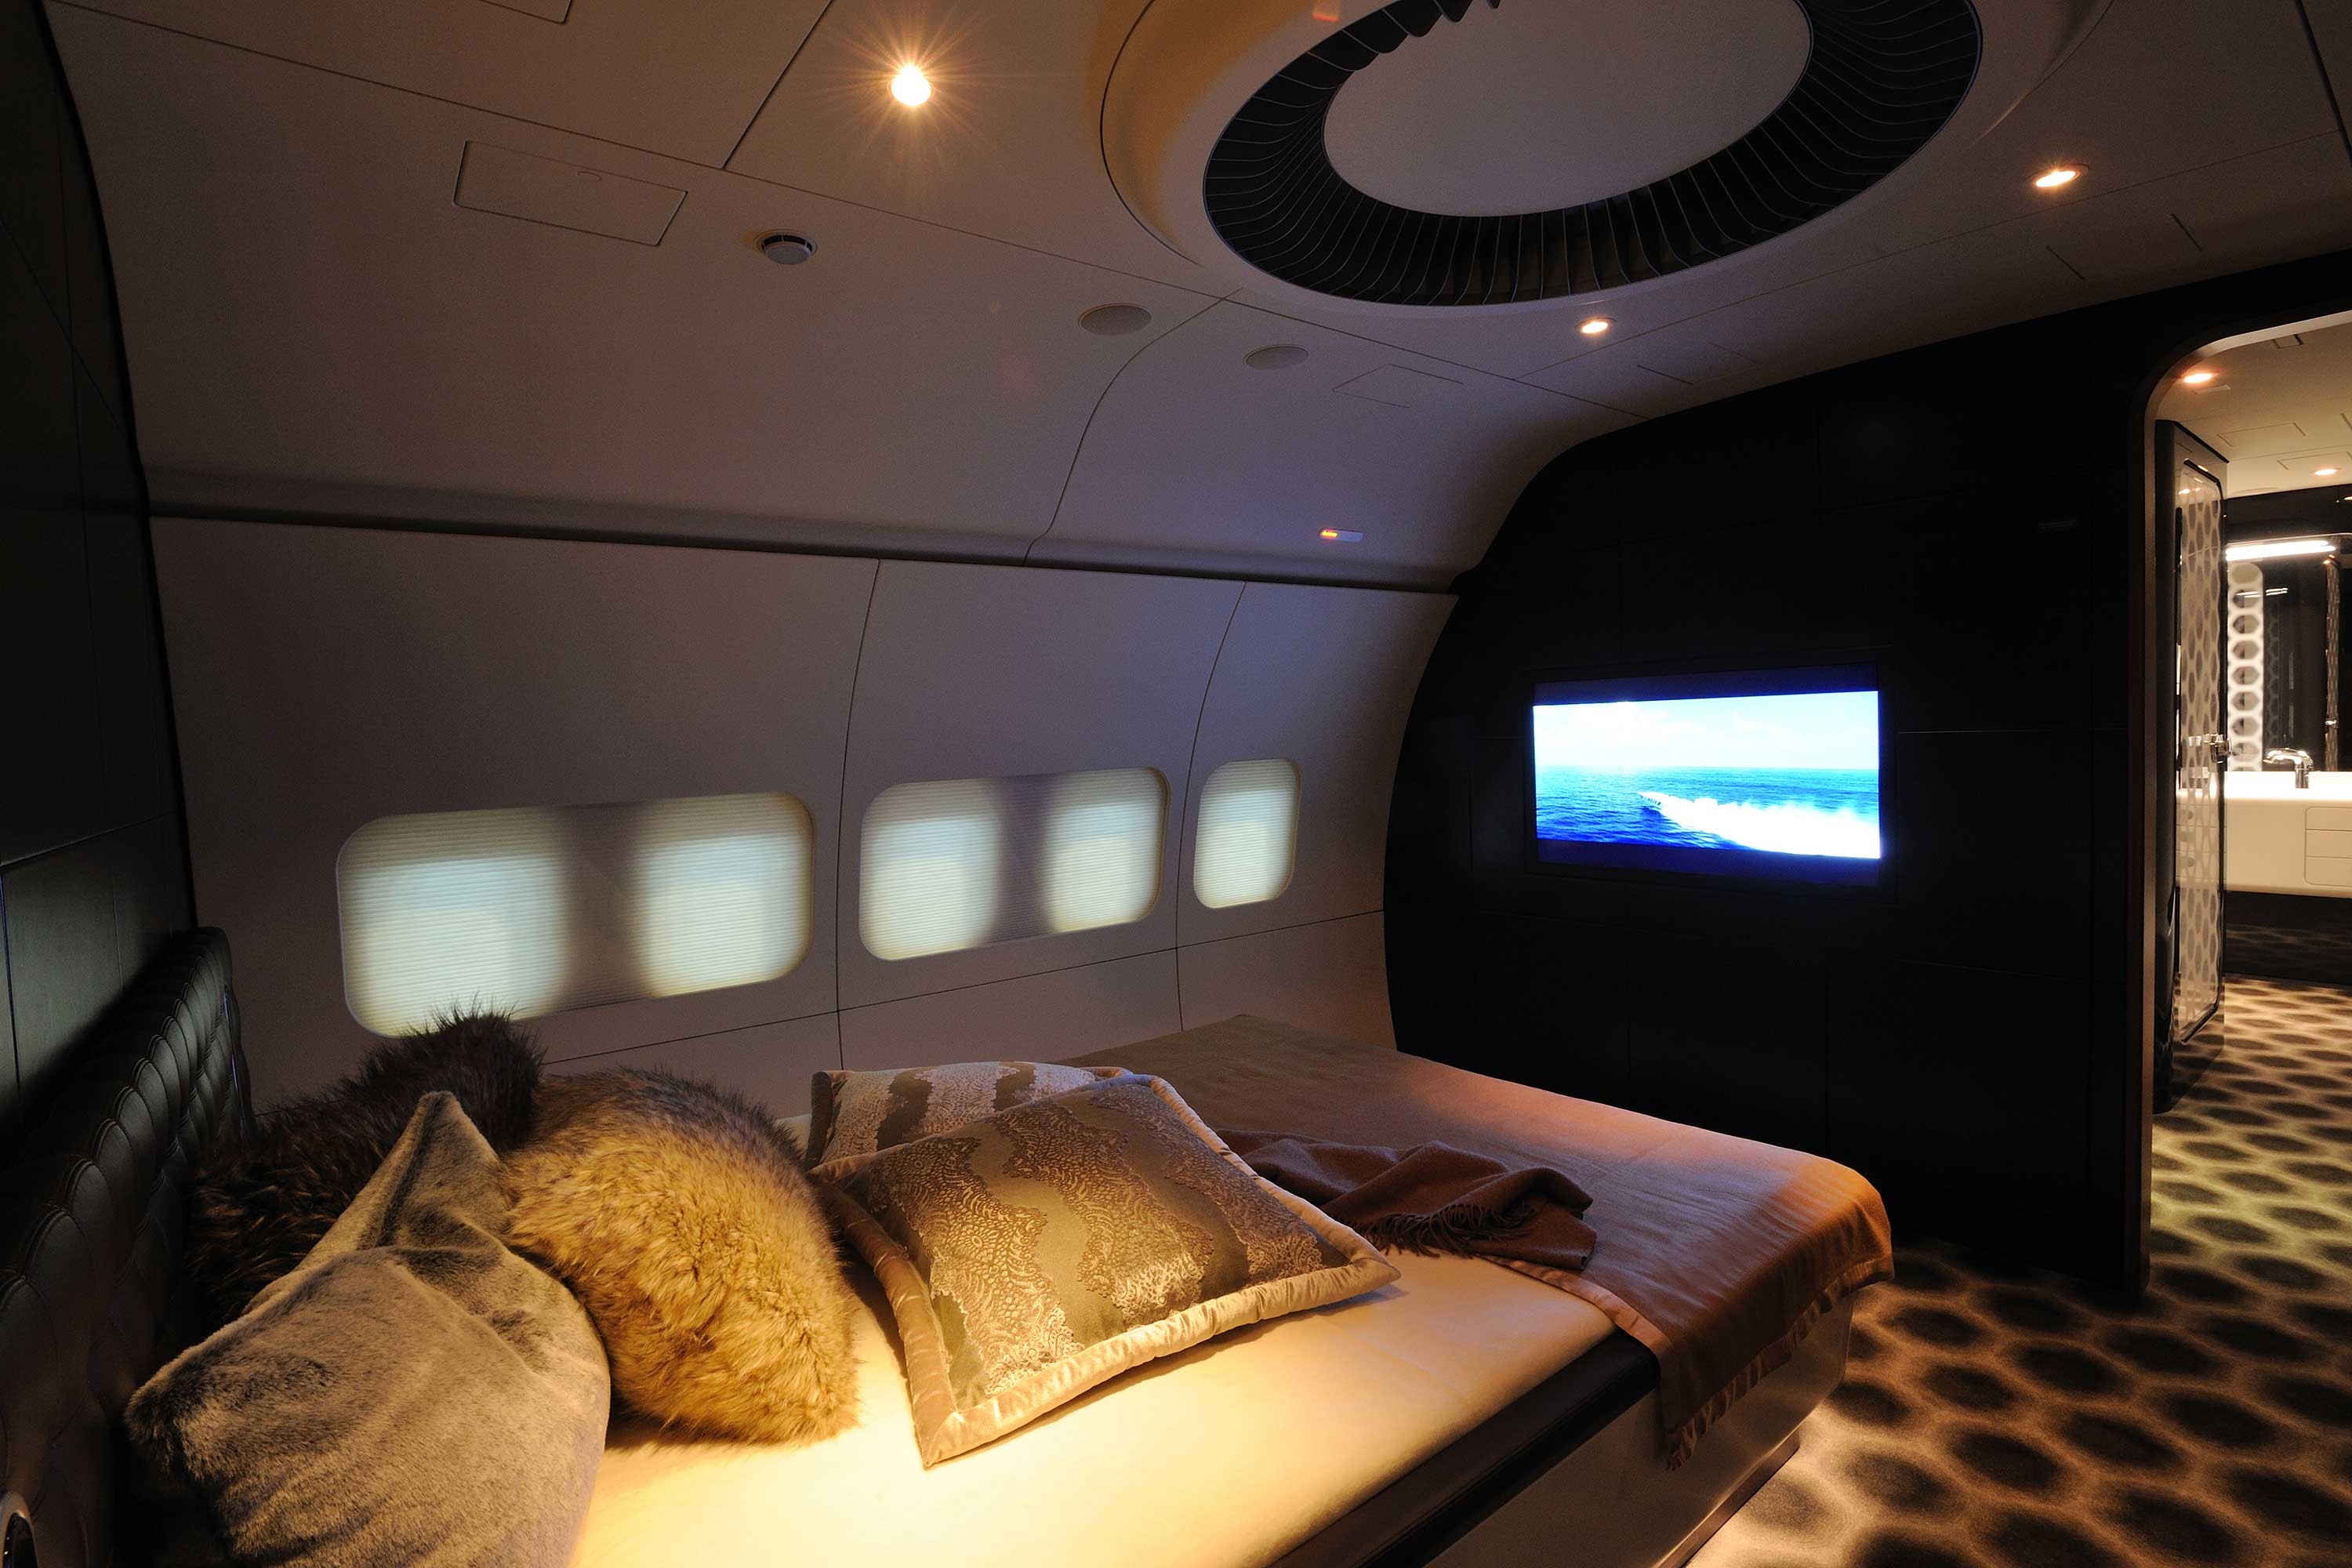 a bed with pillows and a television in the back of it